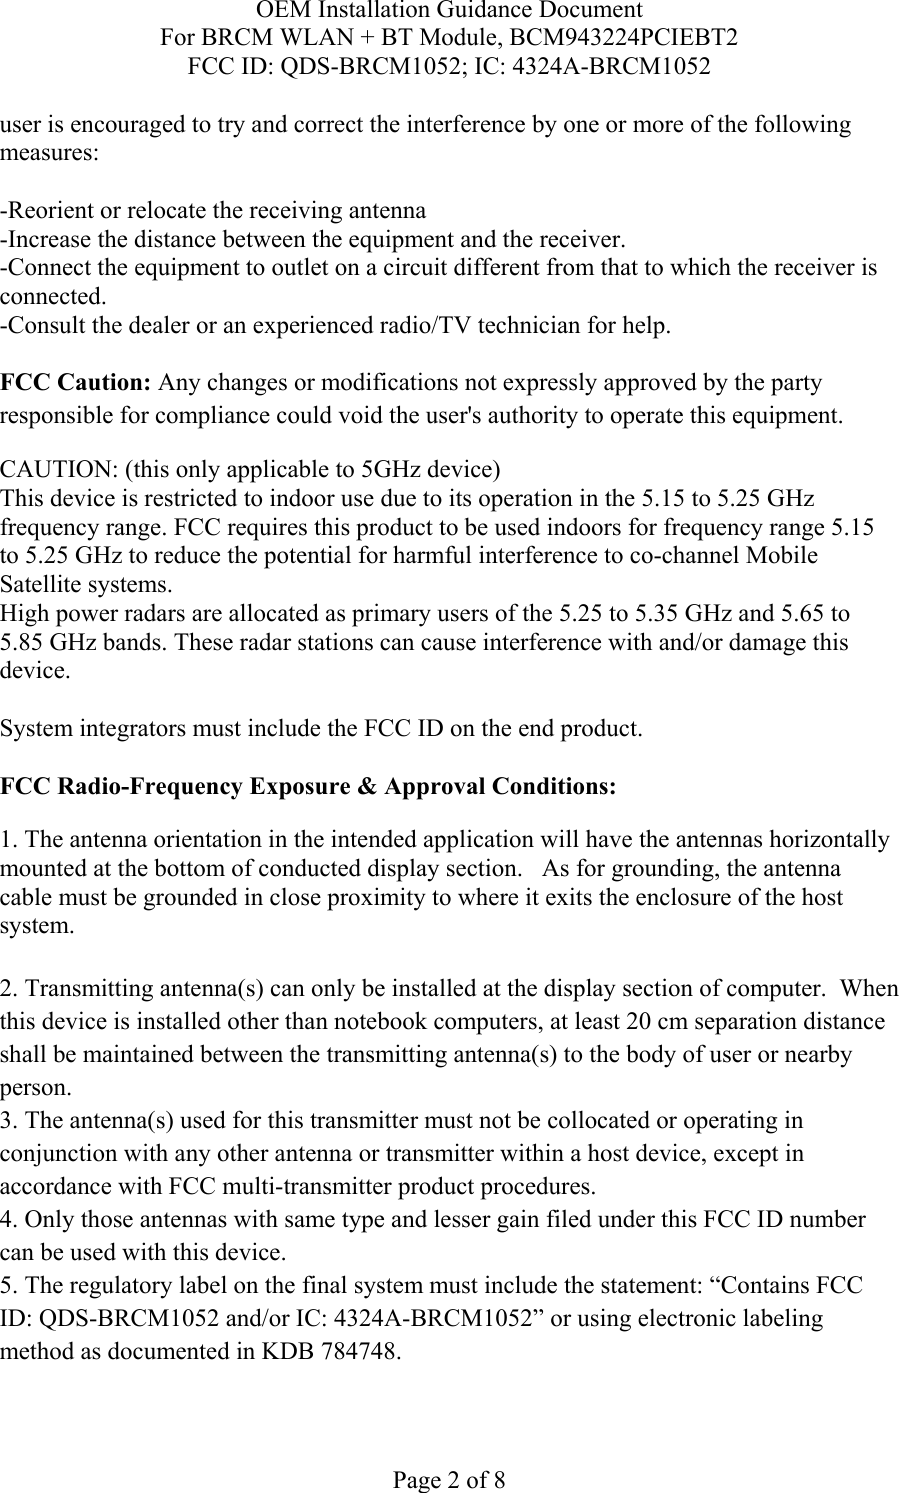 OEM Installation Guidance Document For BRCM WLAN + BT Module, BCM943224PCIEBT2 FCC ID: QDS-BRCM1052; IC: 4324A-BRCM1052  Page 2 of 8 user is encouraged to try and correct the interference by one or more of the following measures:   -Reorient or relocate the receiving antenna -Increase the distance between the equipment and the receiver. -Connect the equipment to outlet on a circuit different from that to which the receiver is connected. -Consult the dealer or an experienced radio/TV technician for help.  FCC Caution: Any changes or modifications not expressly approved by the party responsible for compliance could void the user&apos;s authority to operate this equipment. CAUTION: (this only applicable to 5GHz device) This device is restricted to indoor use due to its operation in the 5.15 to 5.25 GHz frequency range. FCC requires this product to be used indoors for frequency range 5.15 to 5.25 GHz to reduce the potential for harmful interference to co-channel Mobile Satellite systems. High power radars are allocated as primary users of the 5.25 to 5.35 GHz and 5.65 to 5.85 GHz bands. These radar stations can cause interference with and/or damage this device.  System integrators must include the FCC ID on the end product.   FCC Radio-Frequency Exposure &amp; Approval Conditions: 1. The antenna orientation in the intended application will have the antennas horizontally mounted at the bottom of conducted display section.   As for grounding, the antenna cable must be grounded in close proximity to where it exits the enclosure of the host system.  2. Transmitting antenna(s) can only be installed at the display section of computer.  When this device is installed other than notebook computers, at least 20 cm separation distance shall be maintained between the transmitting antenna(s) to the body of user or nearby person. 3. The antenna(s) used for this transmitter must not be collocated or operating in conjunction with any other antenna or transmitter within a host device, except in accordance with FCC multi-transmitter product procedures. 4. Only those antennas with same type and lesser gain filed under this FCC ID number can be used with this device. 5. The regulatory label on the final system must include the statement: “Contains FCC ID: QDS-BRCM1052 and/or IC: 4324A-BRCM1052” or using electronic labeling method as documented in KDB 784748. 